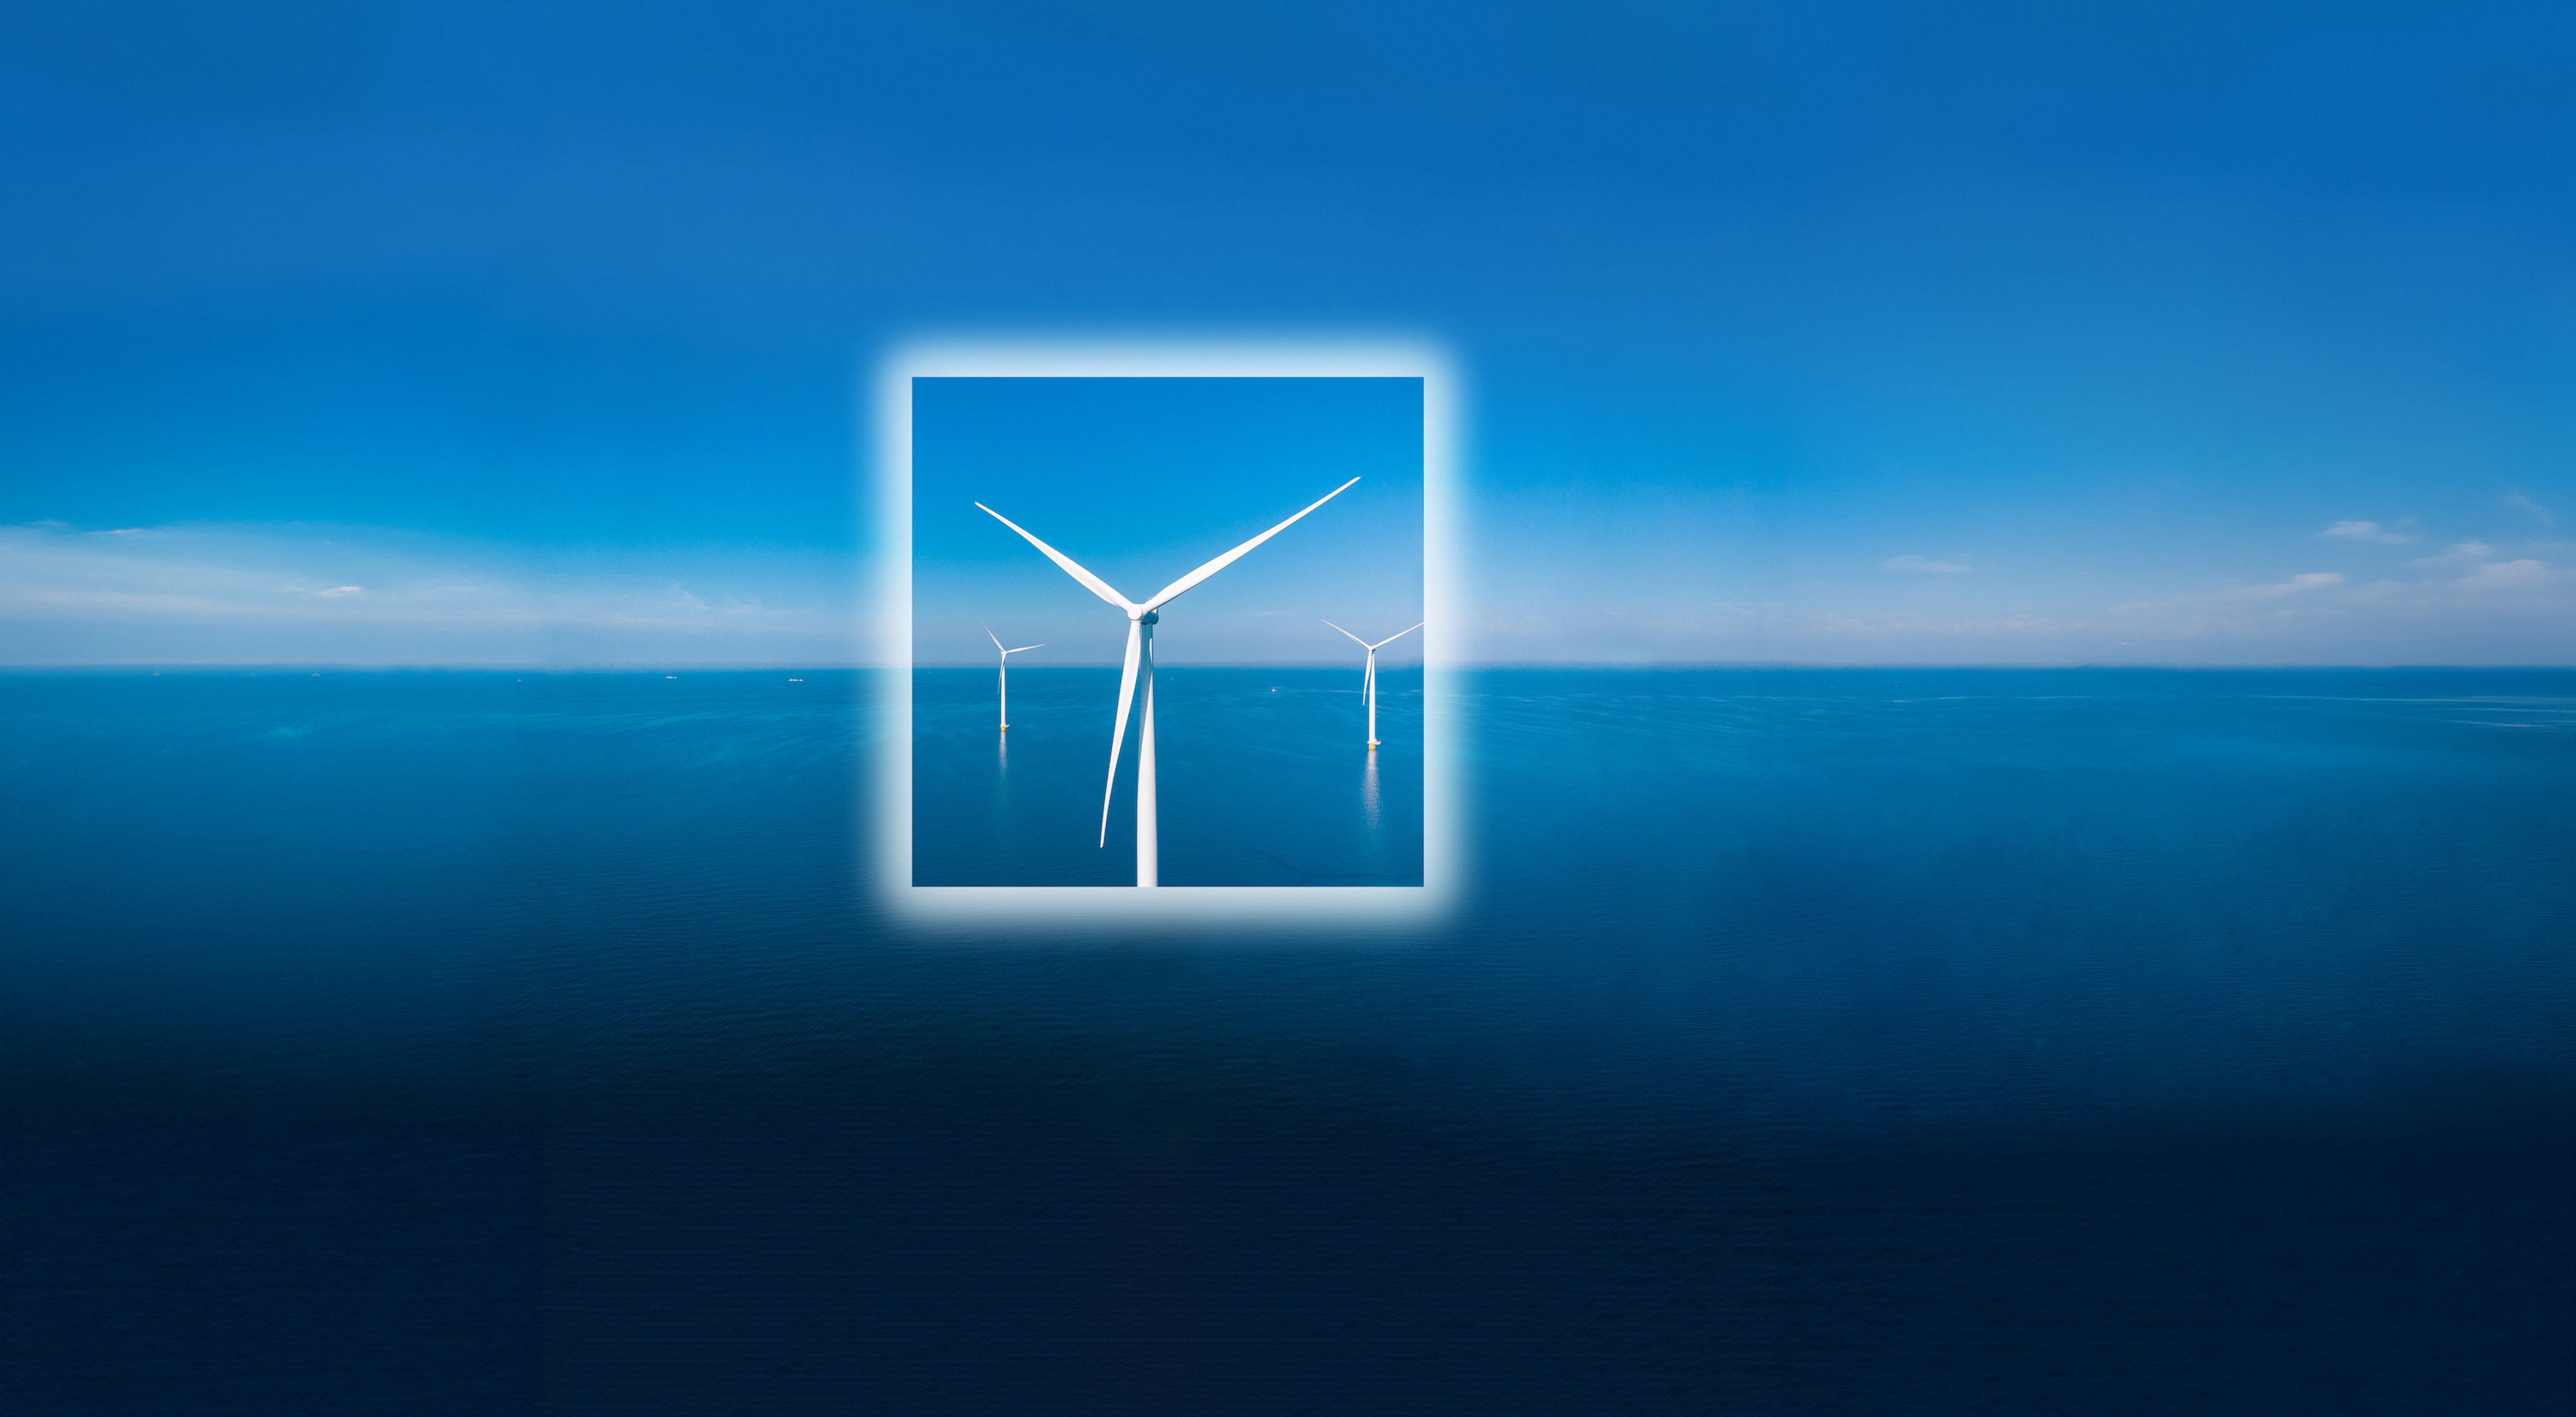 A wind turbine sits in the middle of  a blue ocean with a white square frame around it's body.